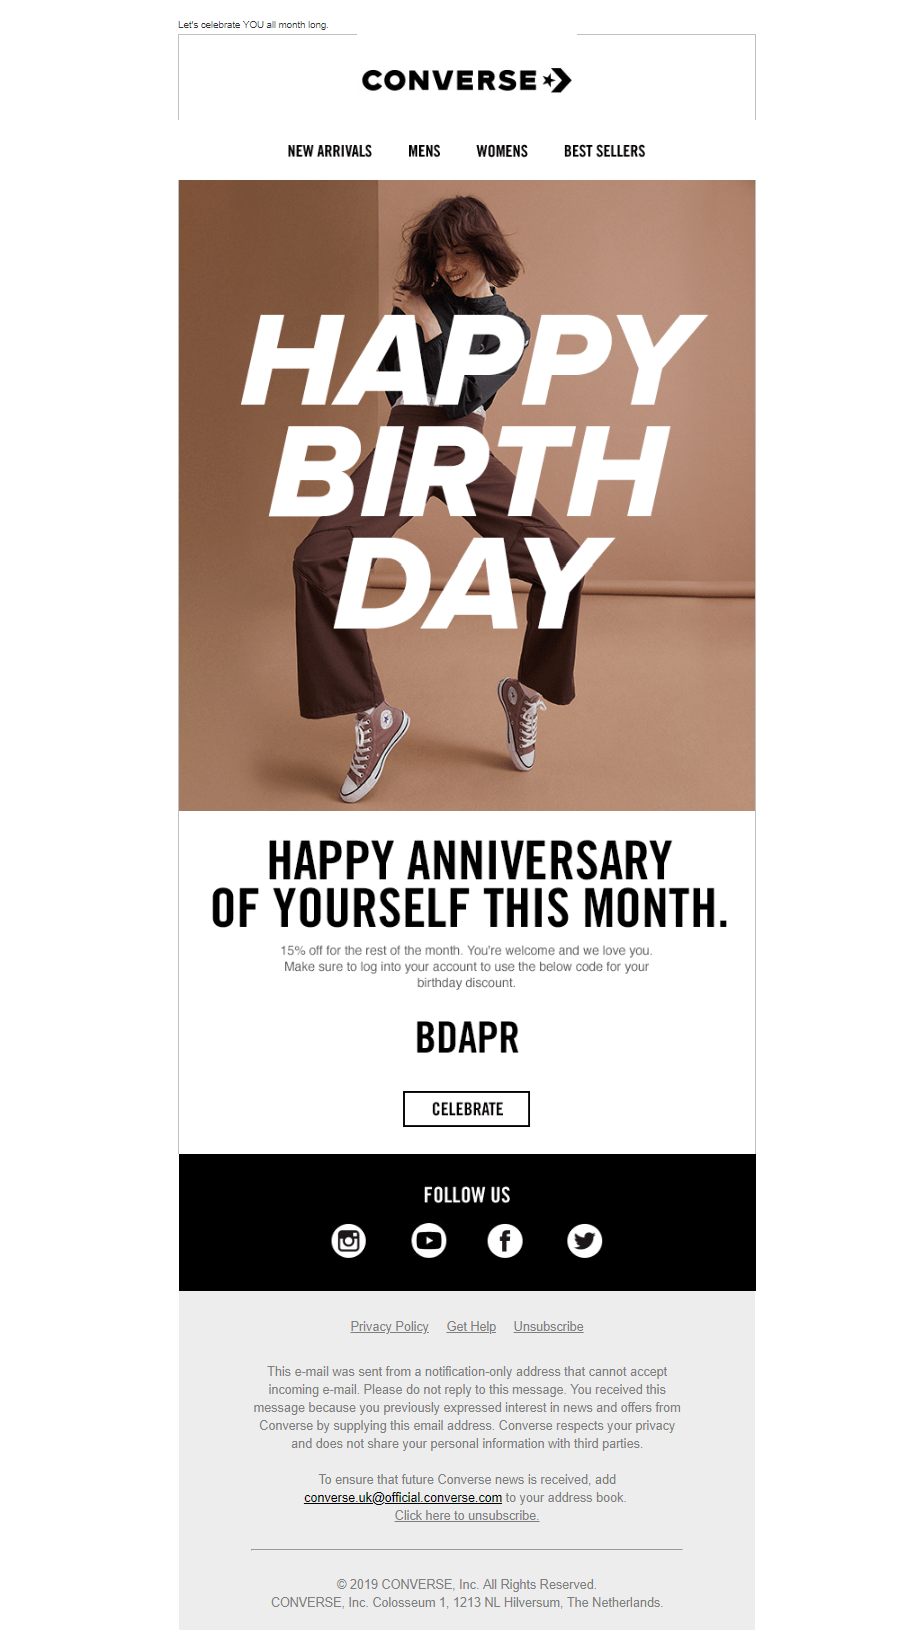 Converse's birthday email